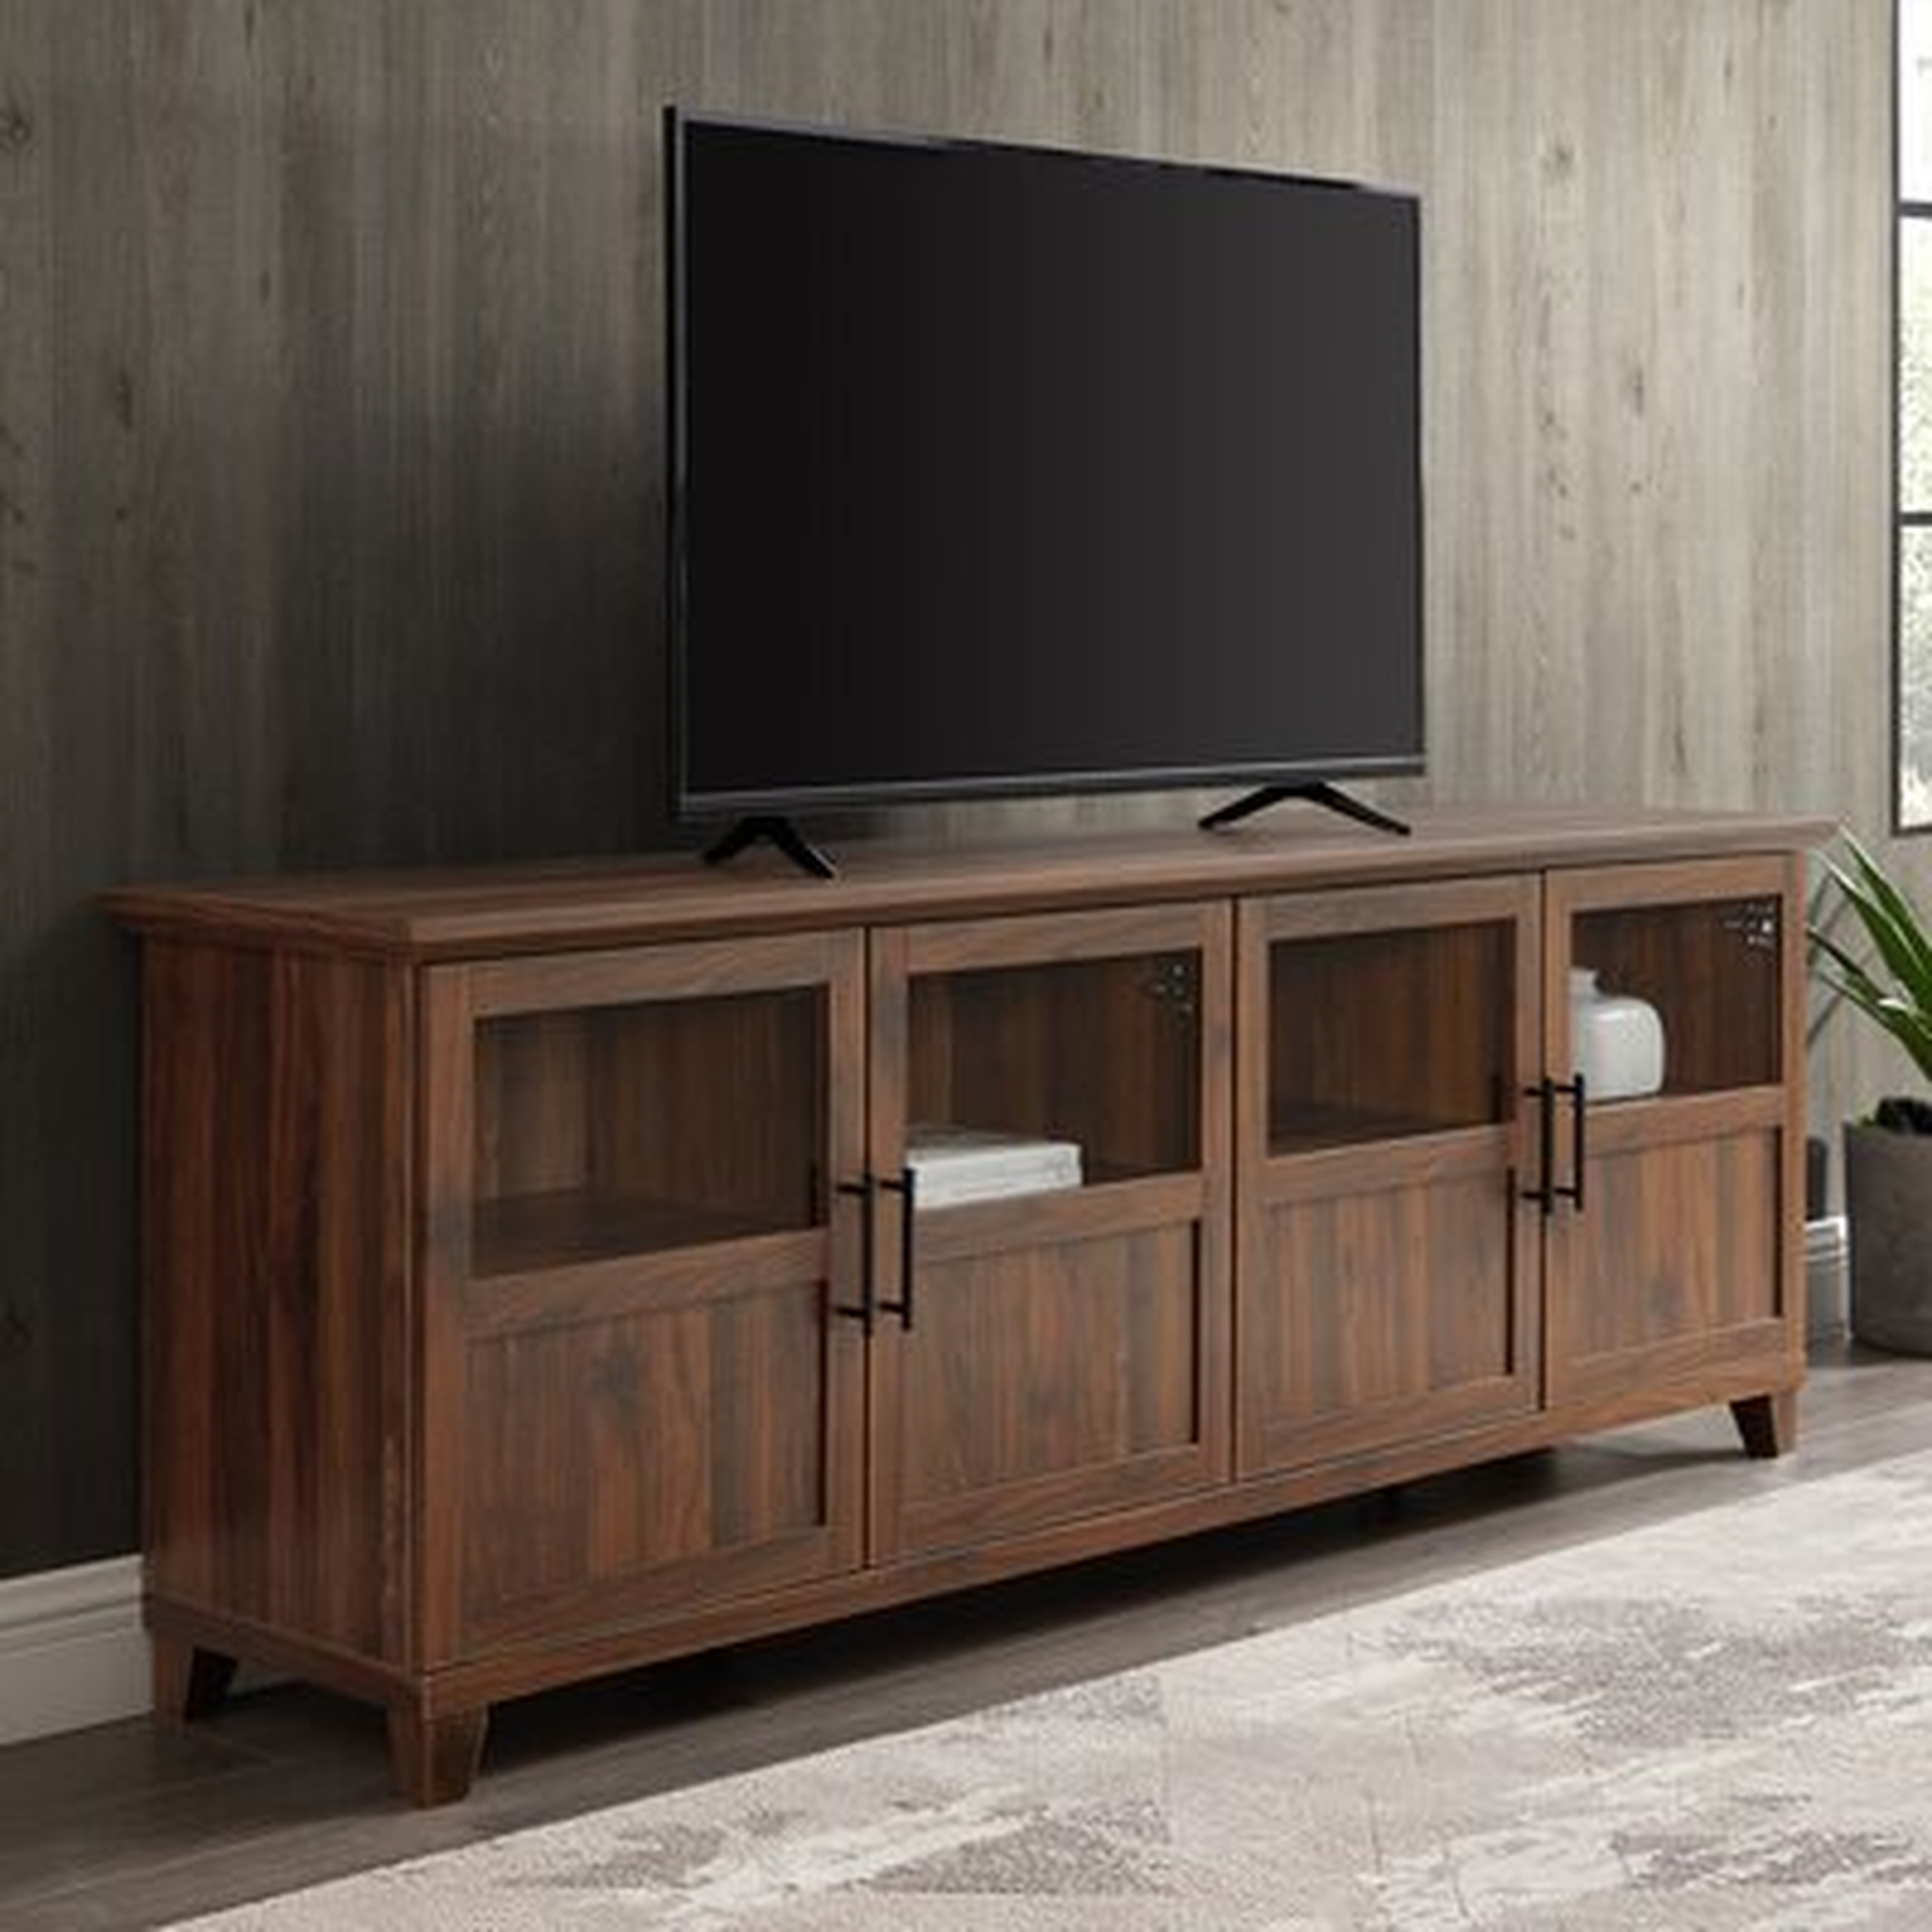 Romain TV Stand for TVs up to 78 inches - Birch Lane